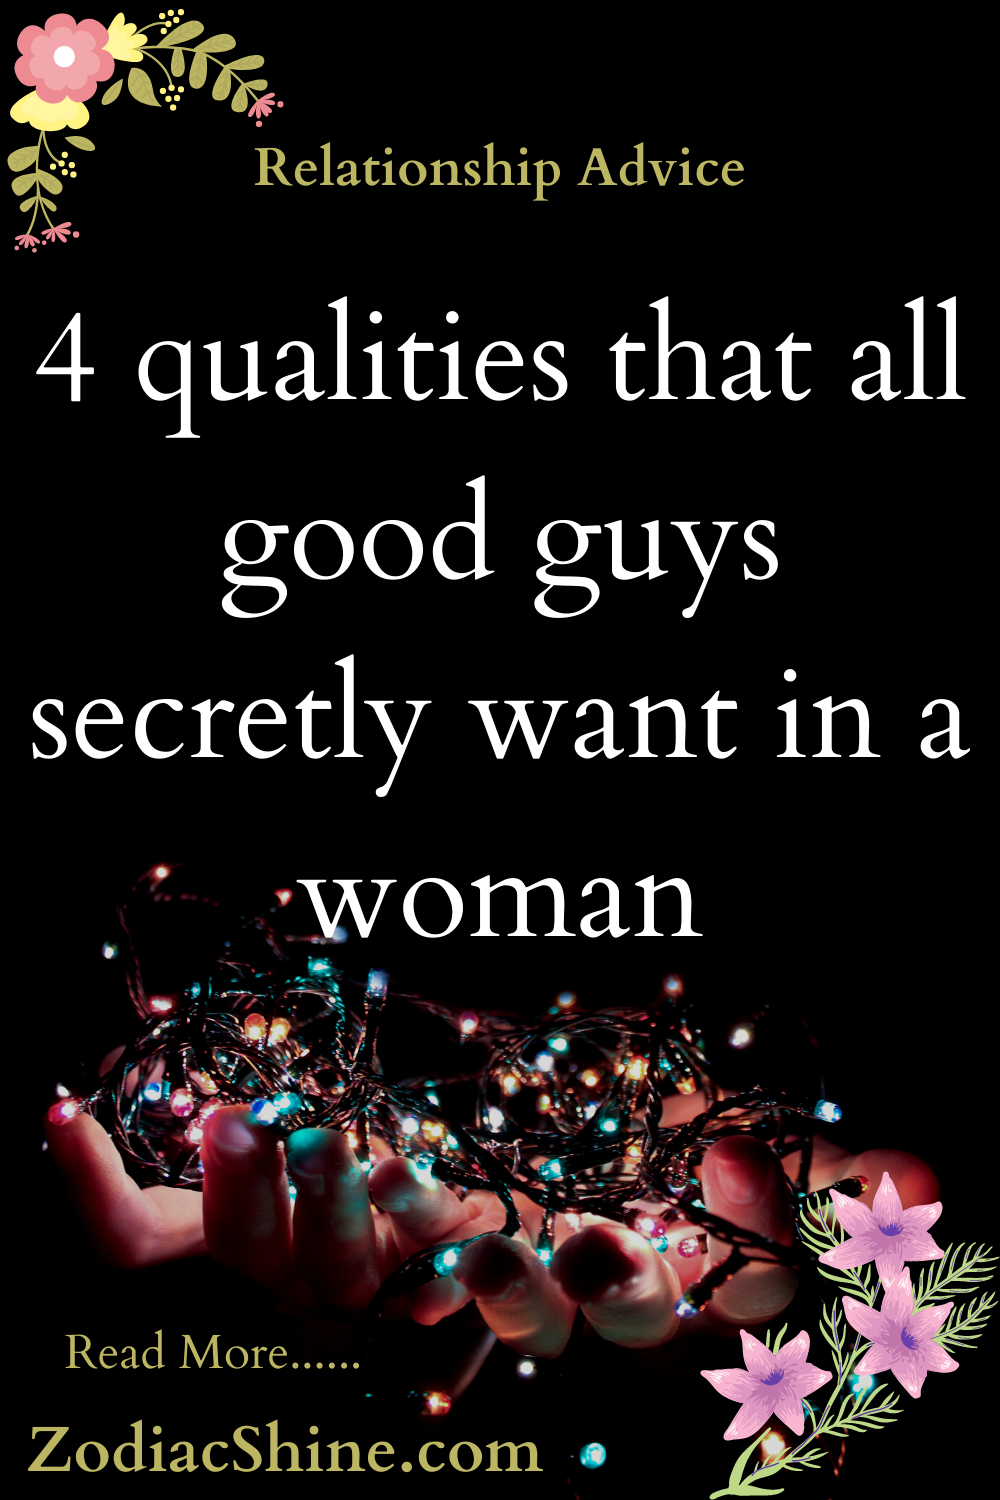 4 qualities that all good guys secretly want in a woman